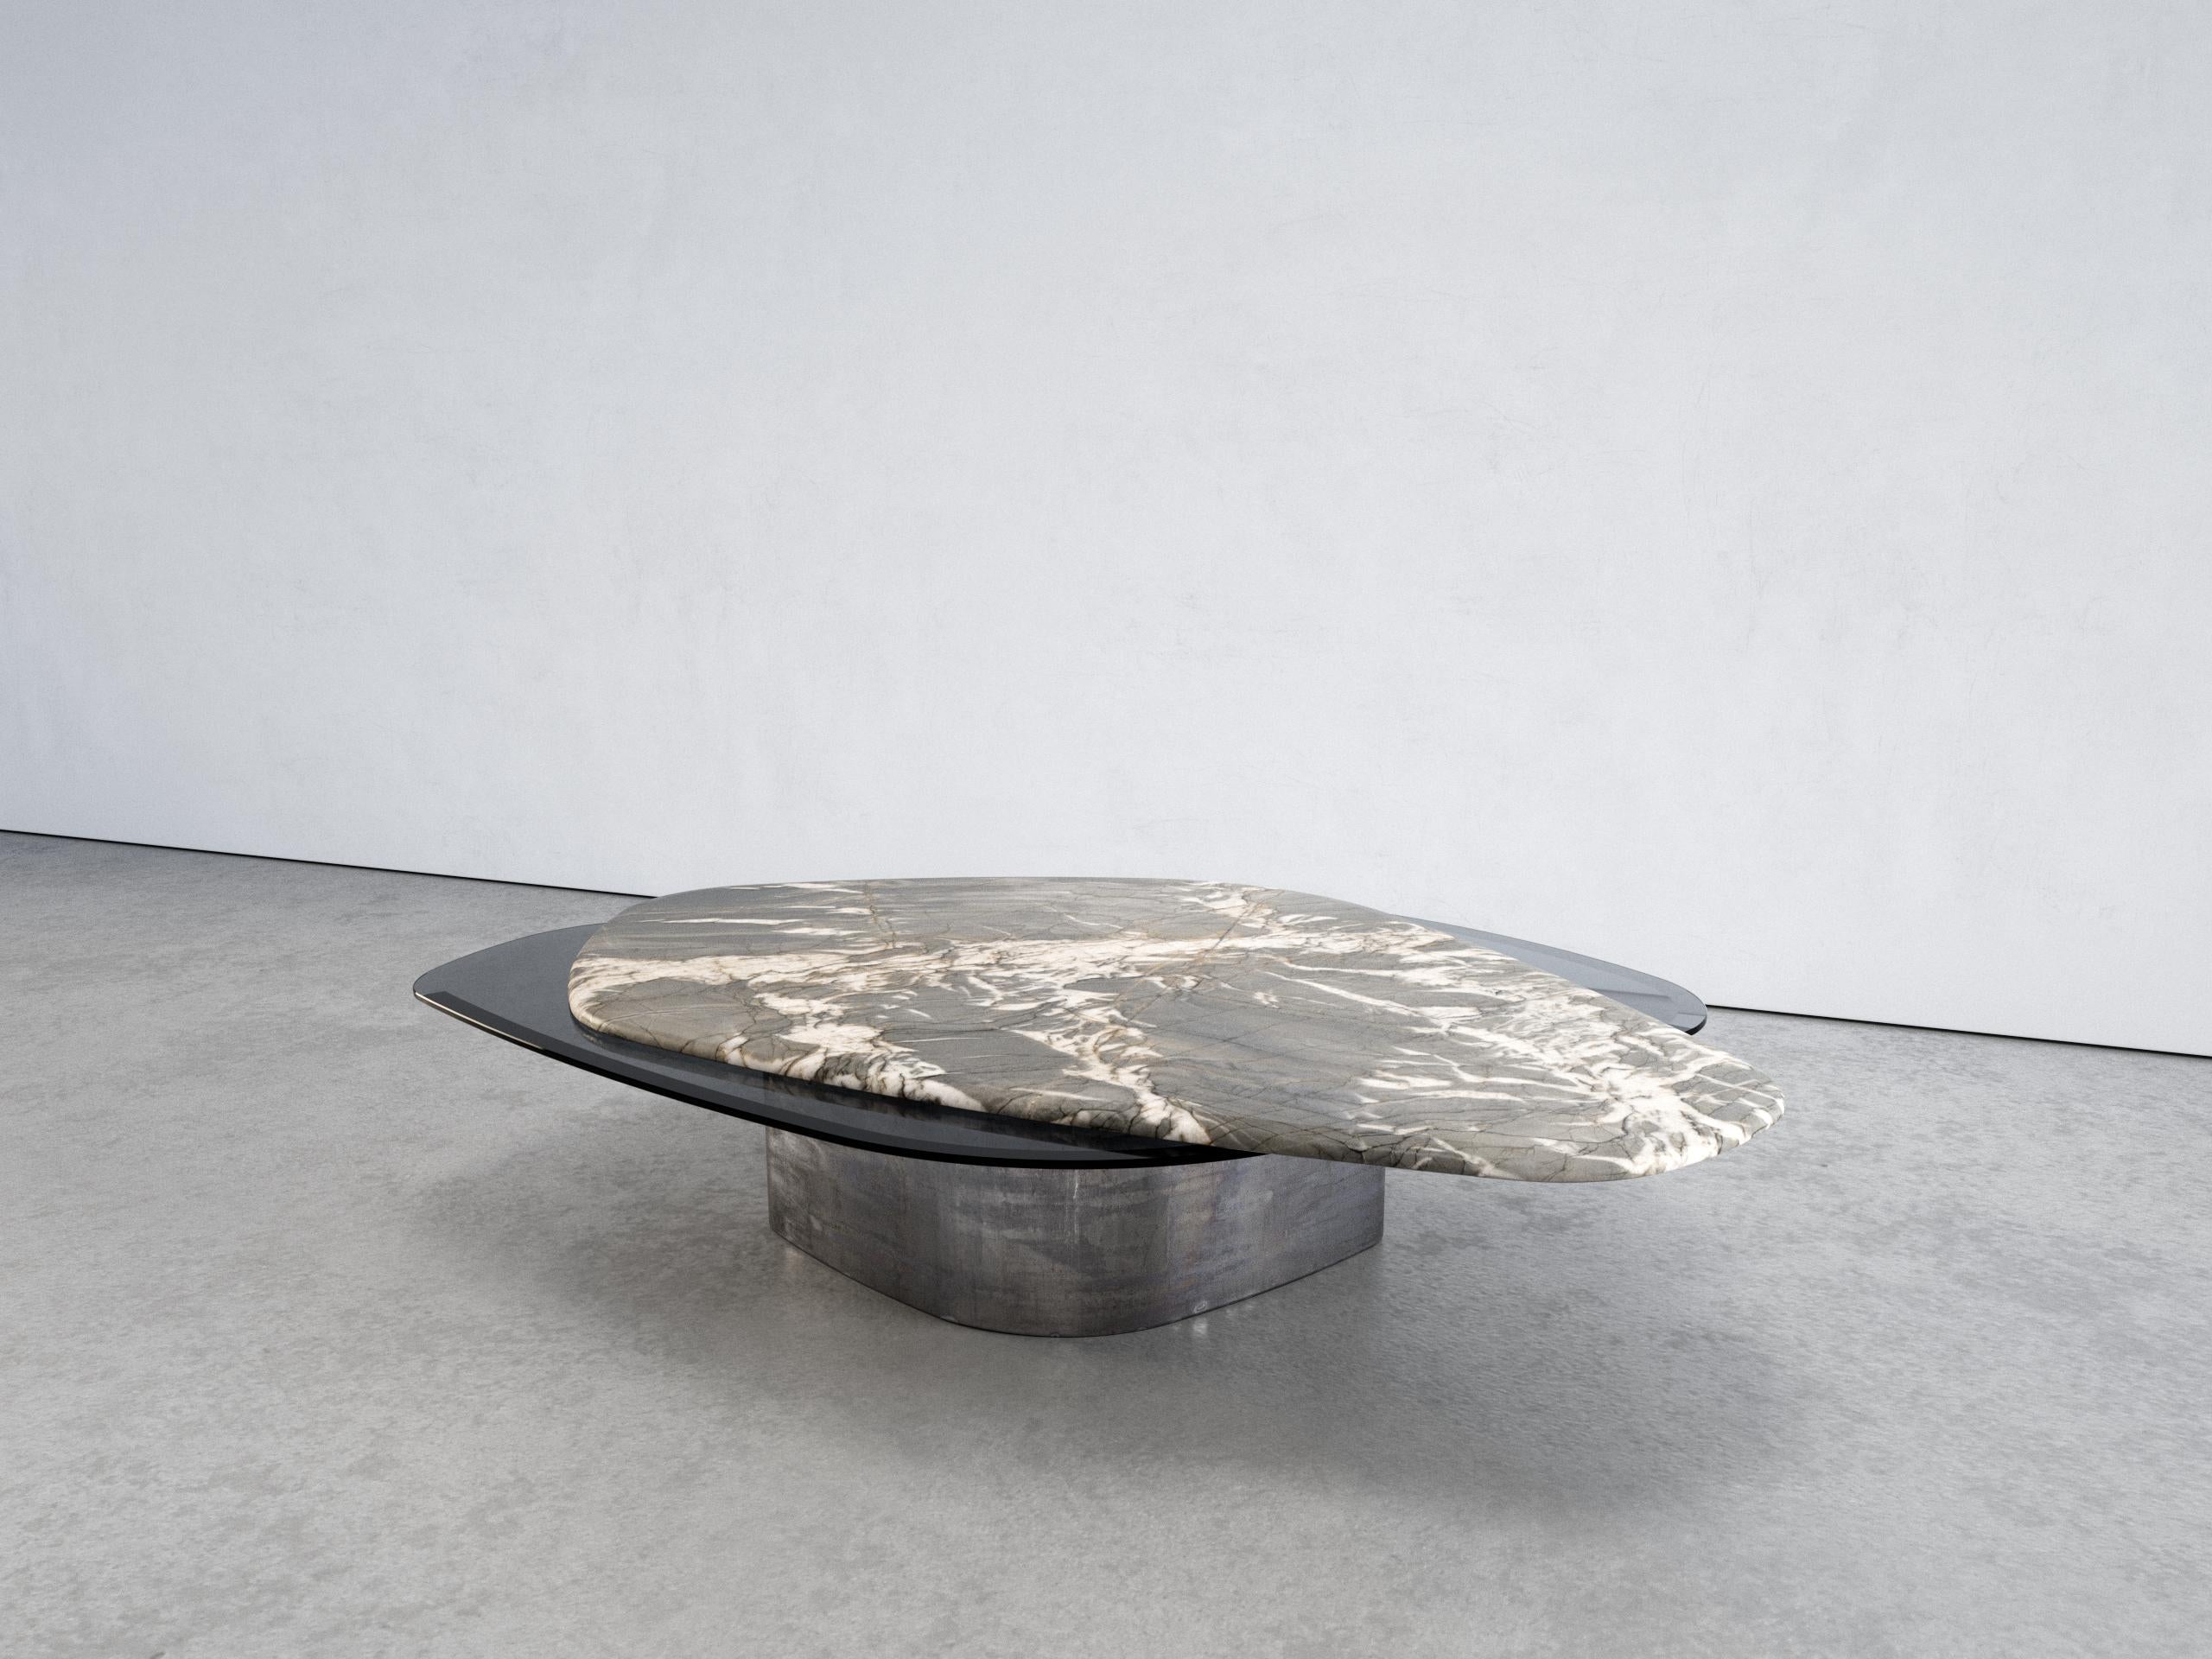 The elements VI coffee table by Grzegorz Majka
Edition 1 of 1
Dimensions: 54.3 x 41.3 x 13 in
Materials: marble, solid stainless steel plate in brushed finish

The Elements III is one of a kind and one of the series of various coffee tables